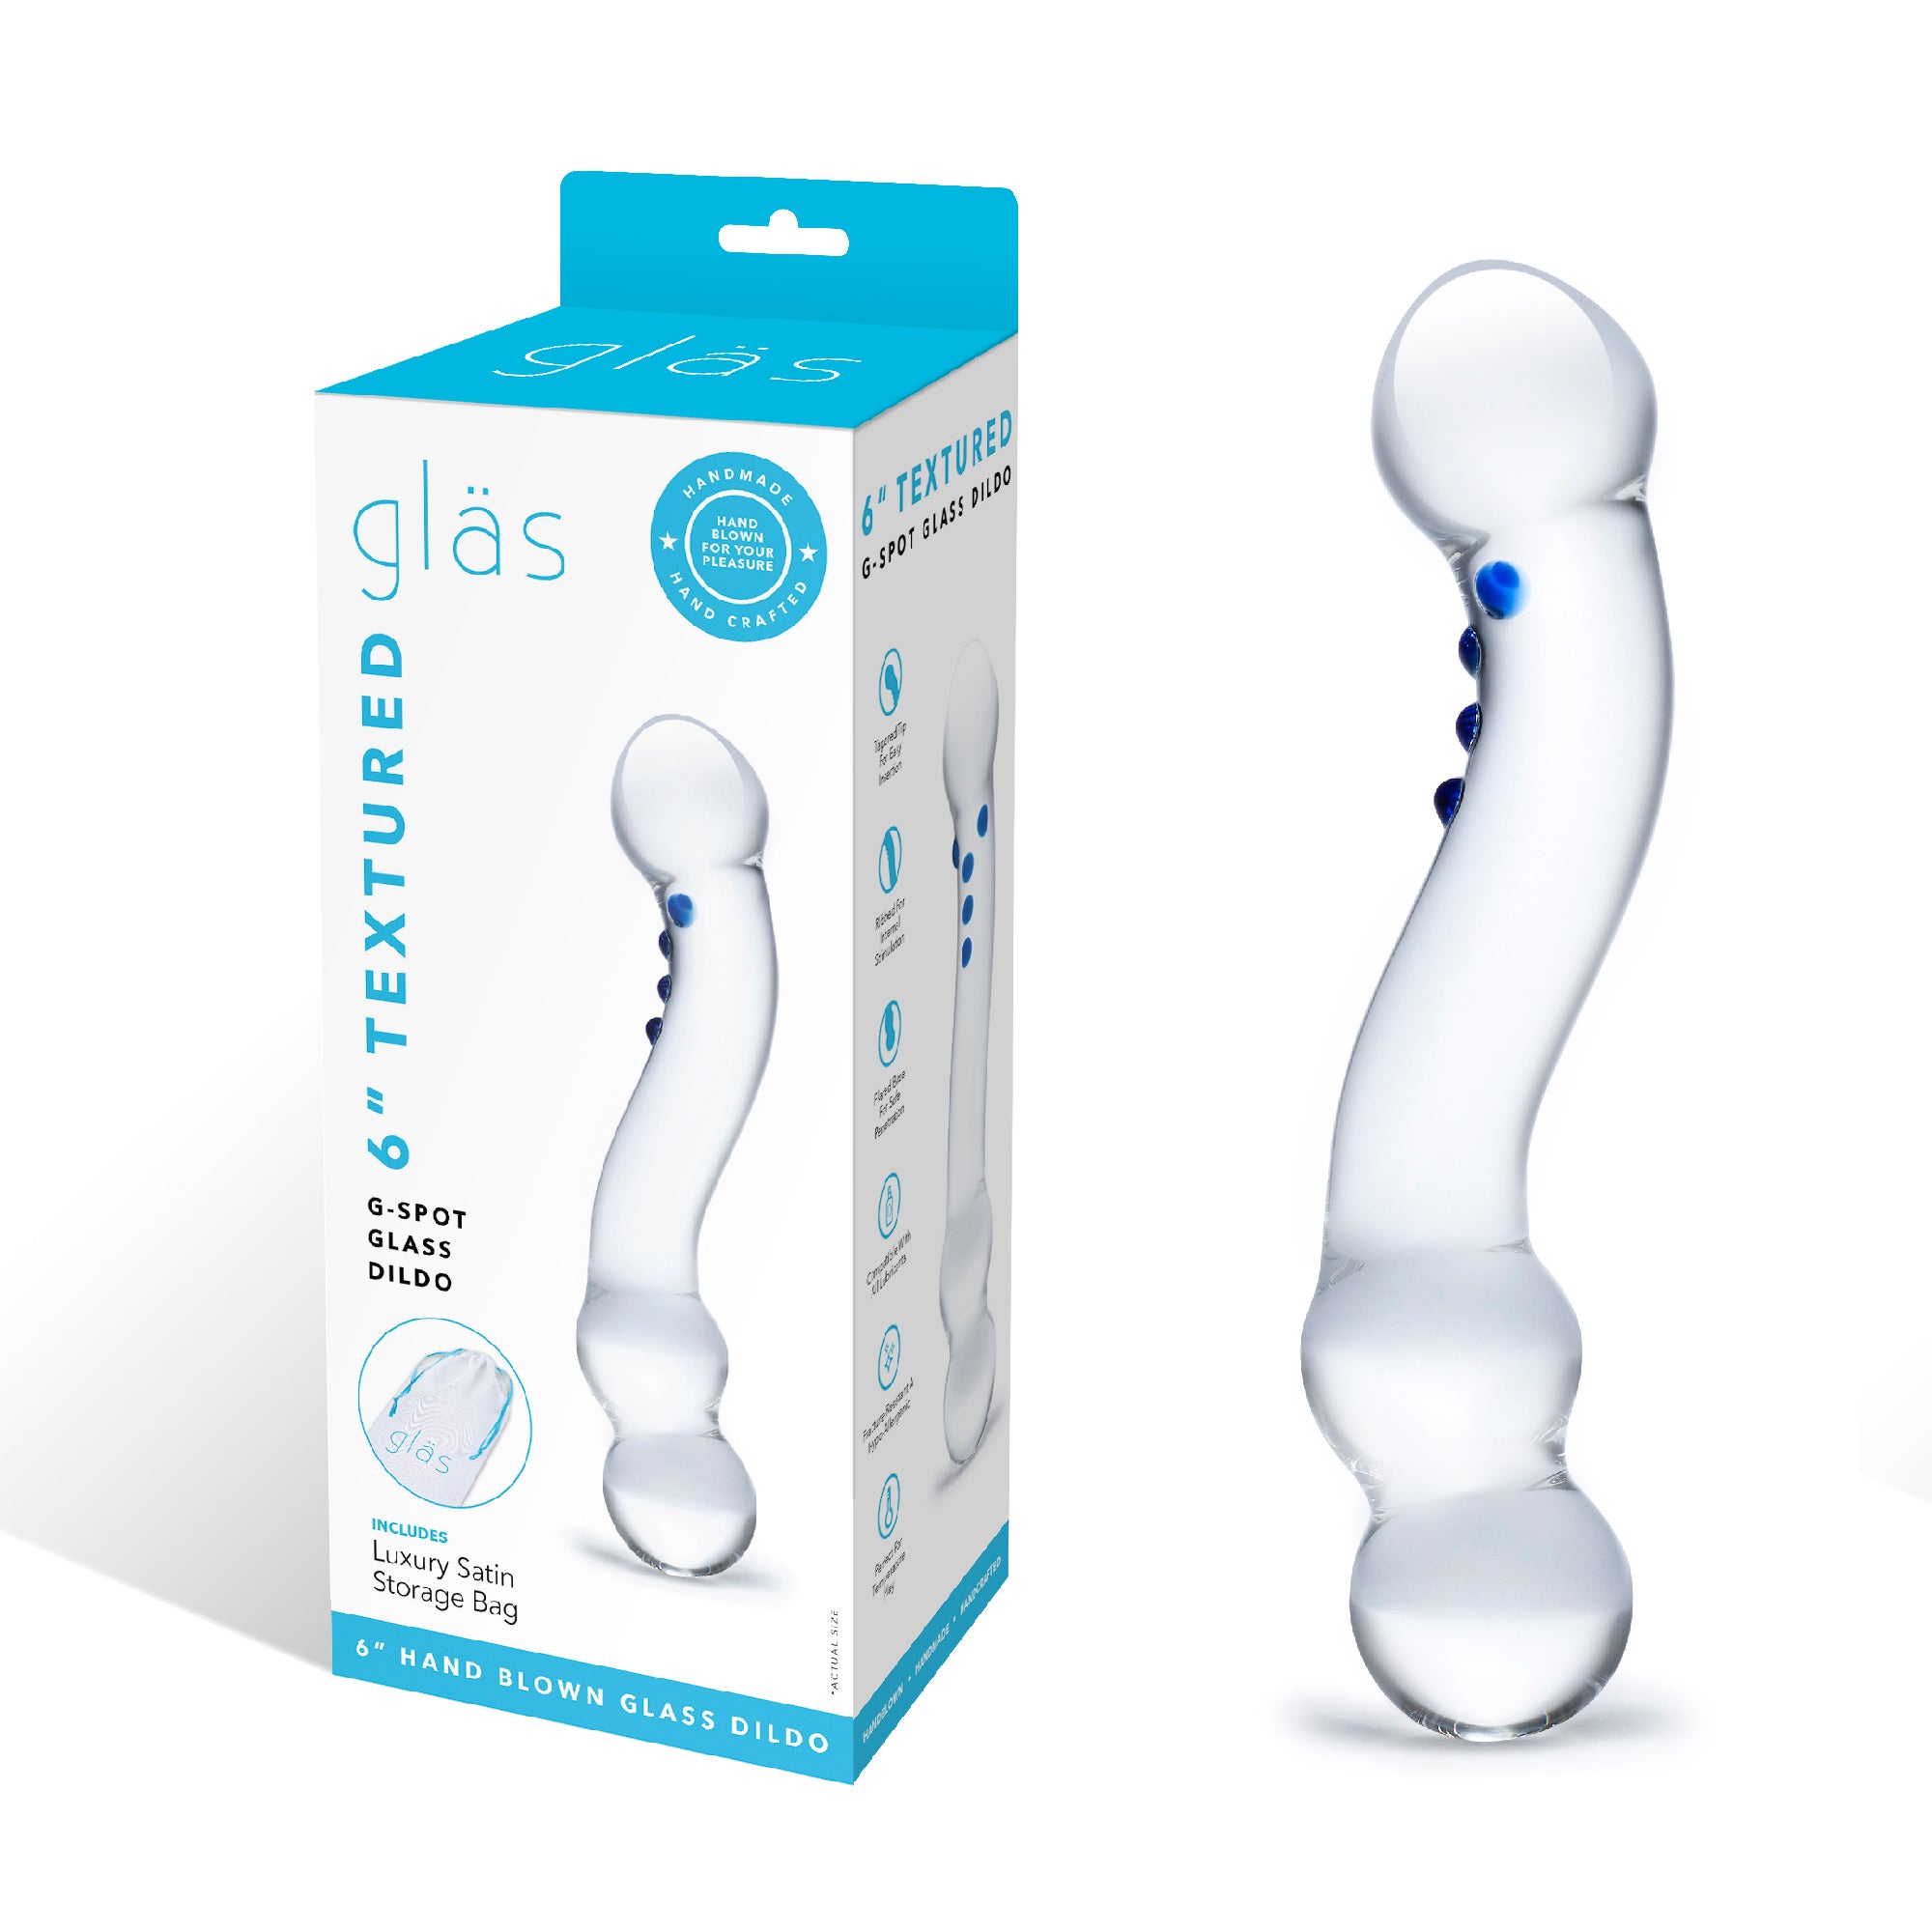 Packaging of the Gläs 6 inch Curved G-Spot Glass Dildo